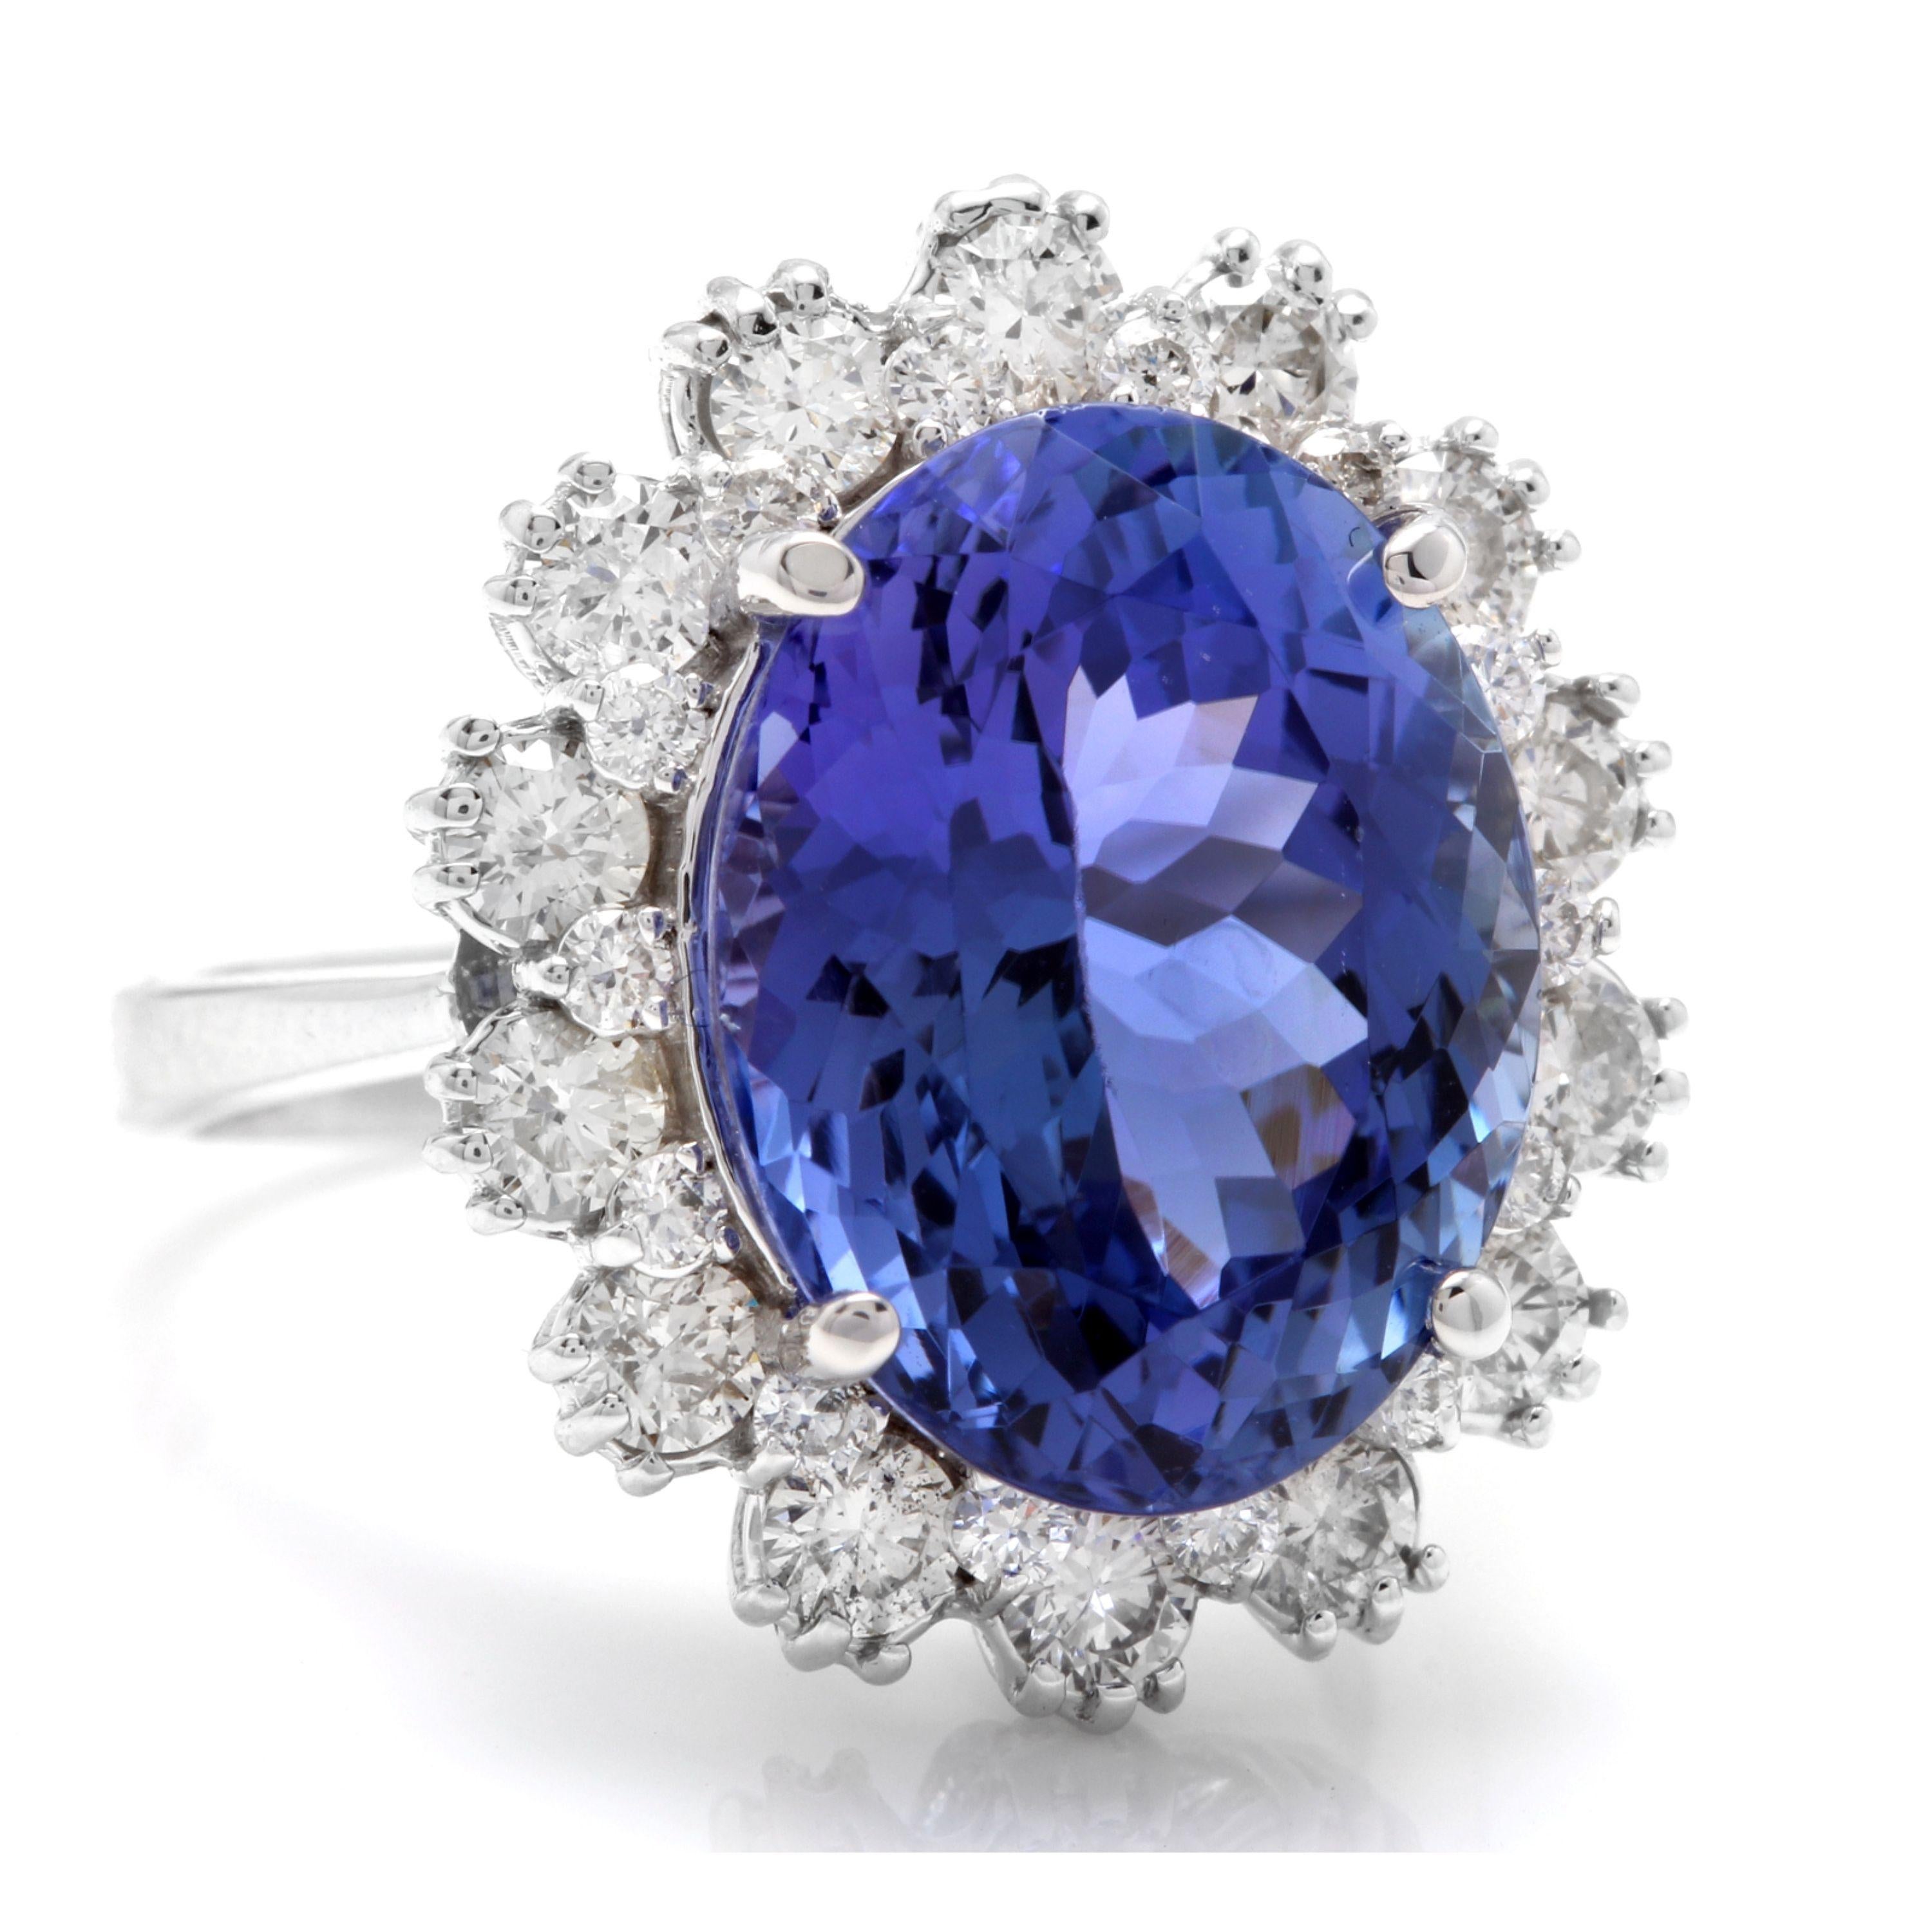 10.50 Carats Natural Very Nice Looking Tanzanite and Diamond 14K Solid White Gold Ring

Total Natural Oval Cut Tanzanite Weight is: Approx. 9.00 Carats

Tanzanite Measures: Approx. 13.00 x 11.00mm

Natural Round Diamonds Weight: Approx. 1.50 Carats